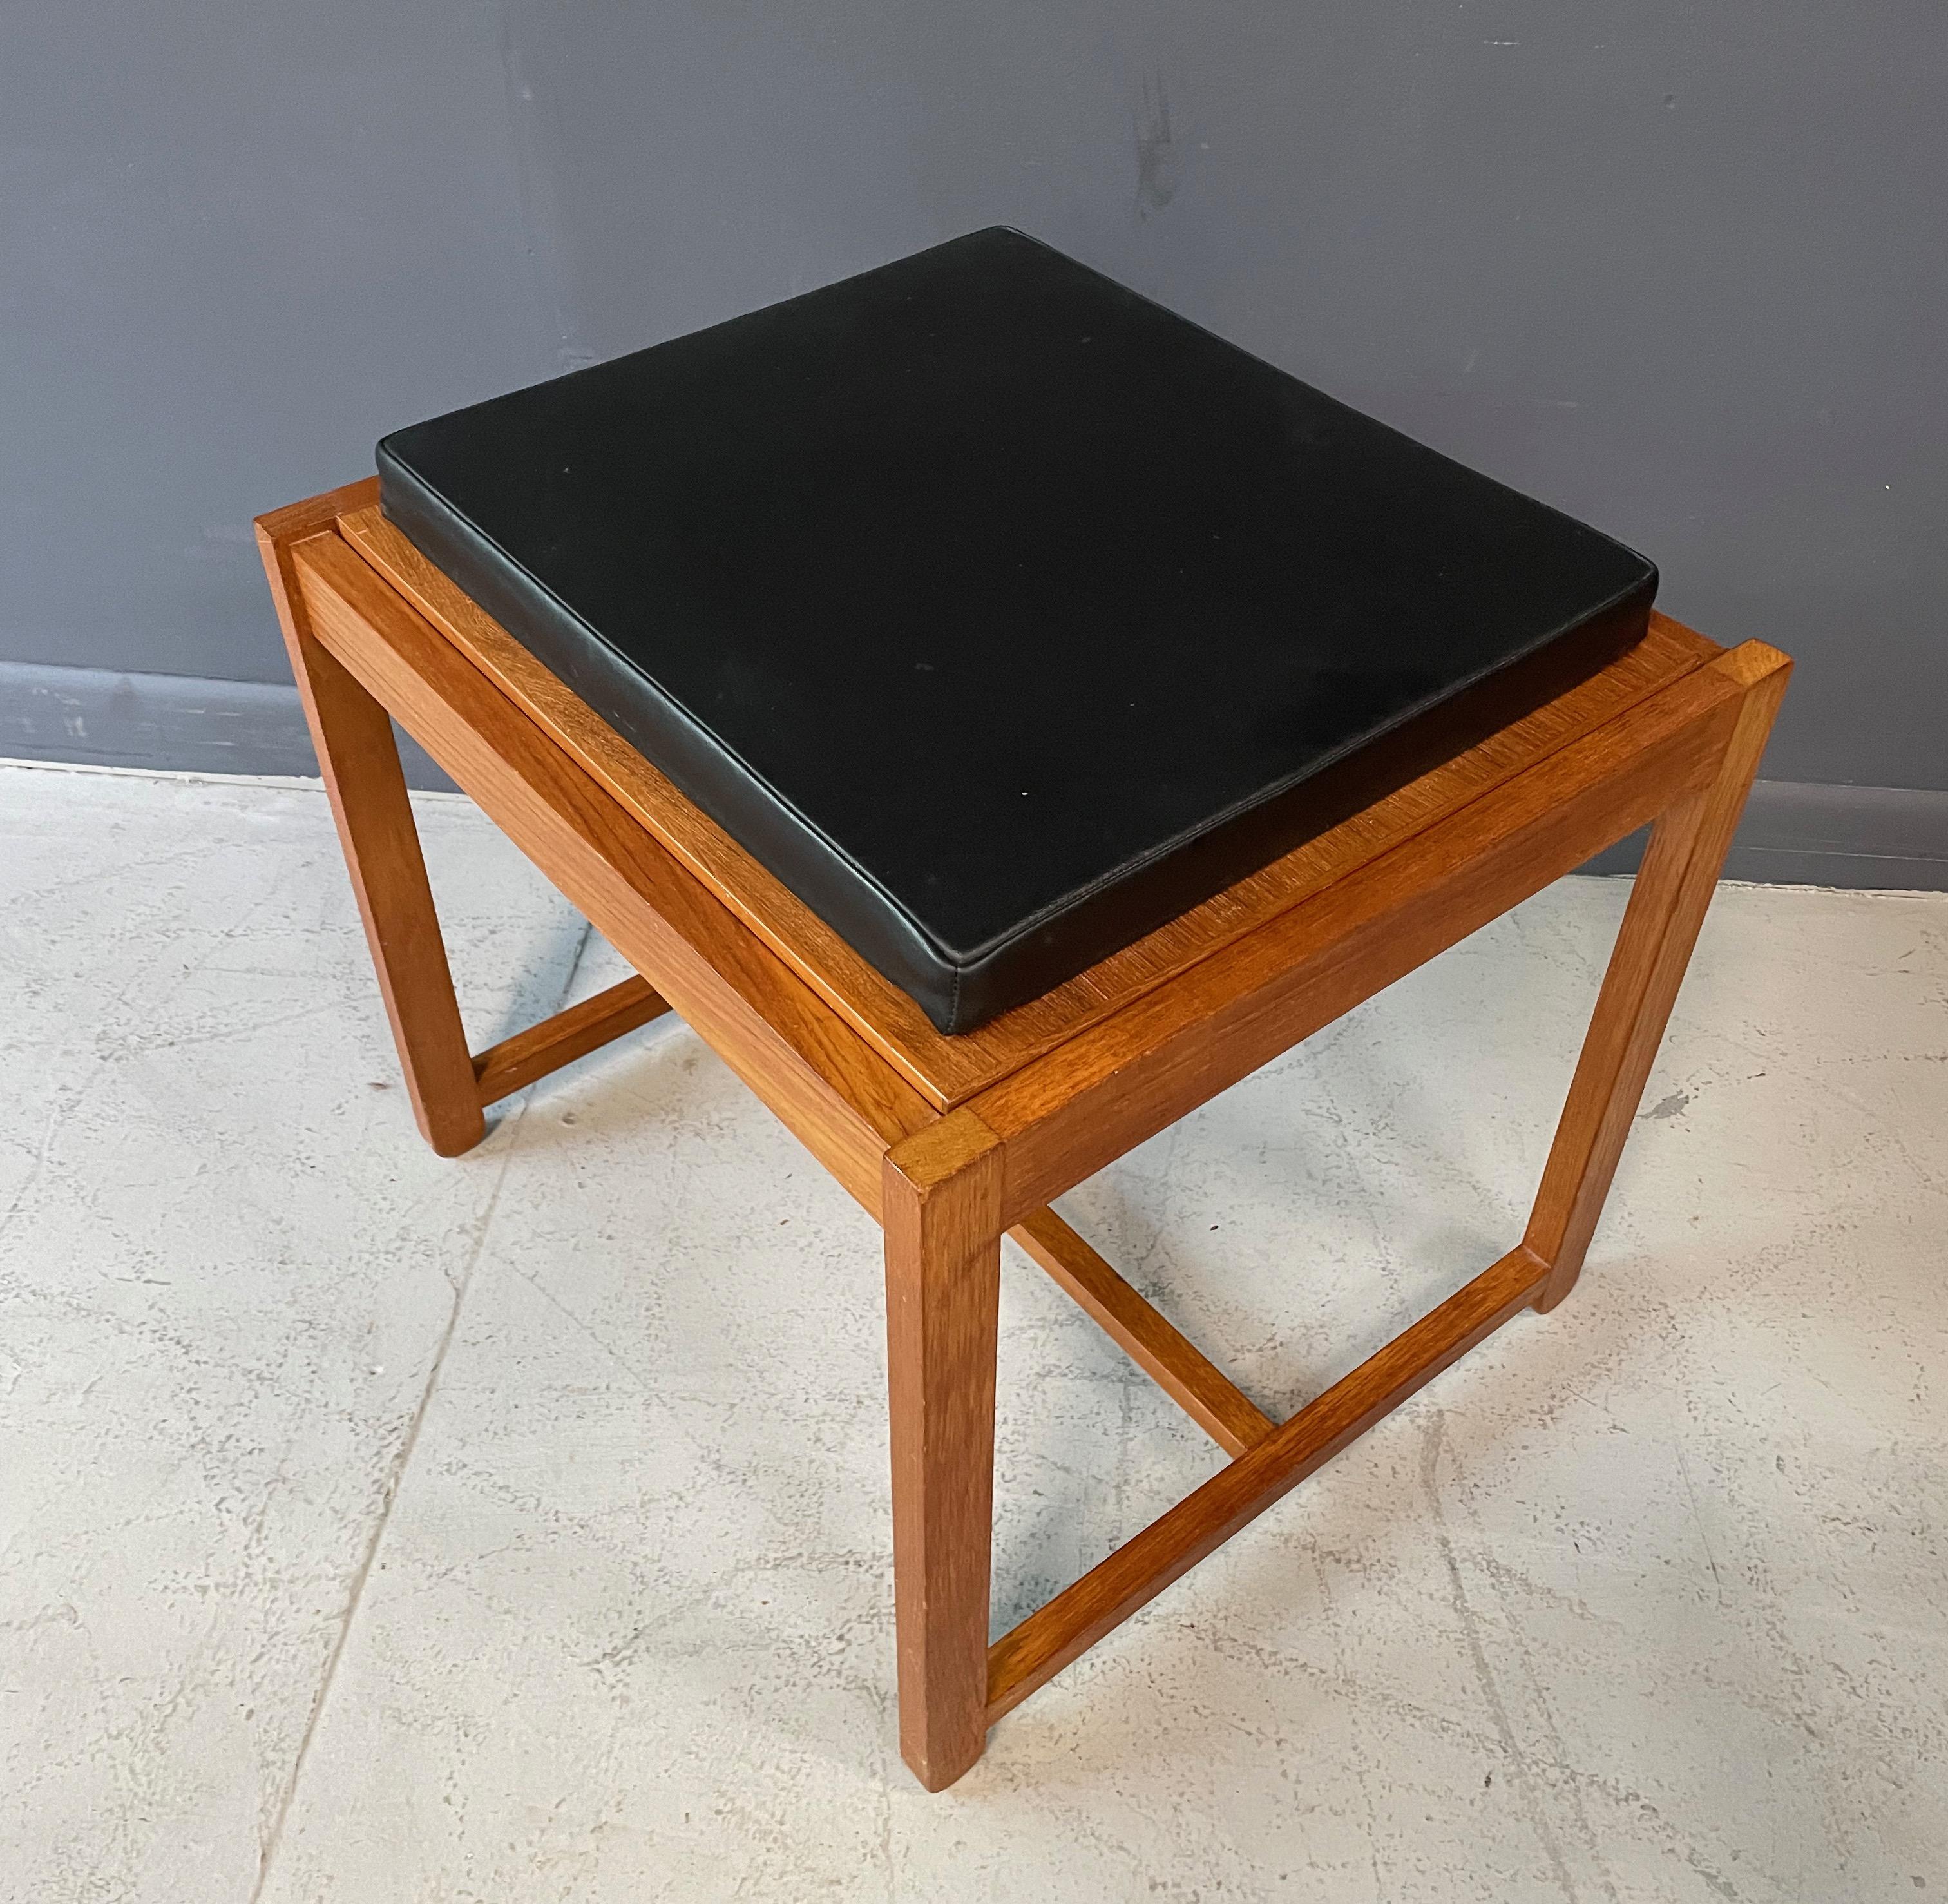 Designed in 1957 by Erik Buch. This piece has a wonderful architectural quality about it. This is a reversible stool or makes great side table. Made in Odense, Denmark. The leather is still soft and supple, the teak is in great shape.